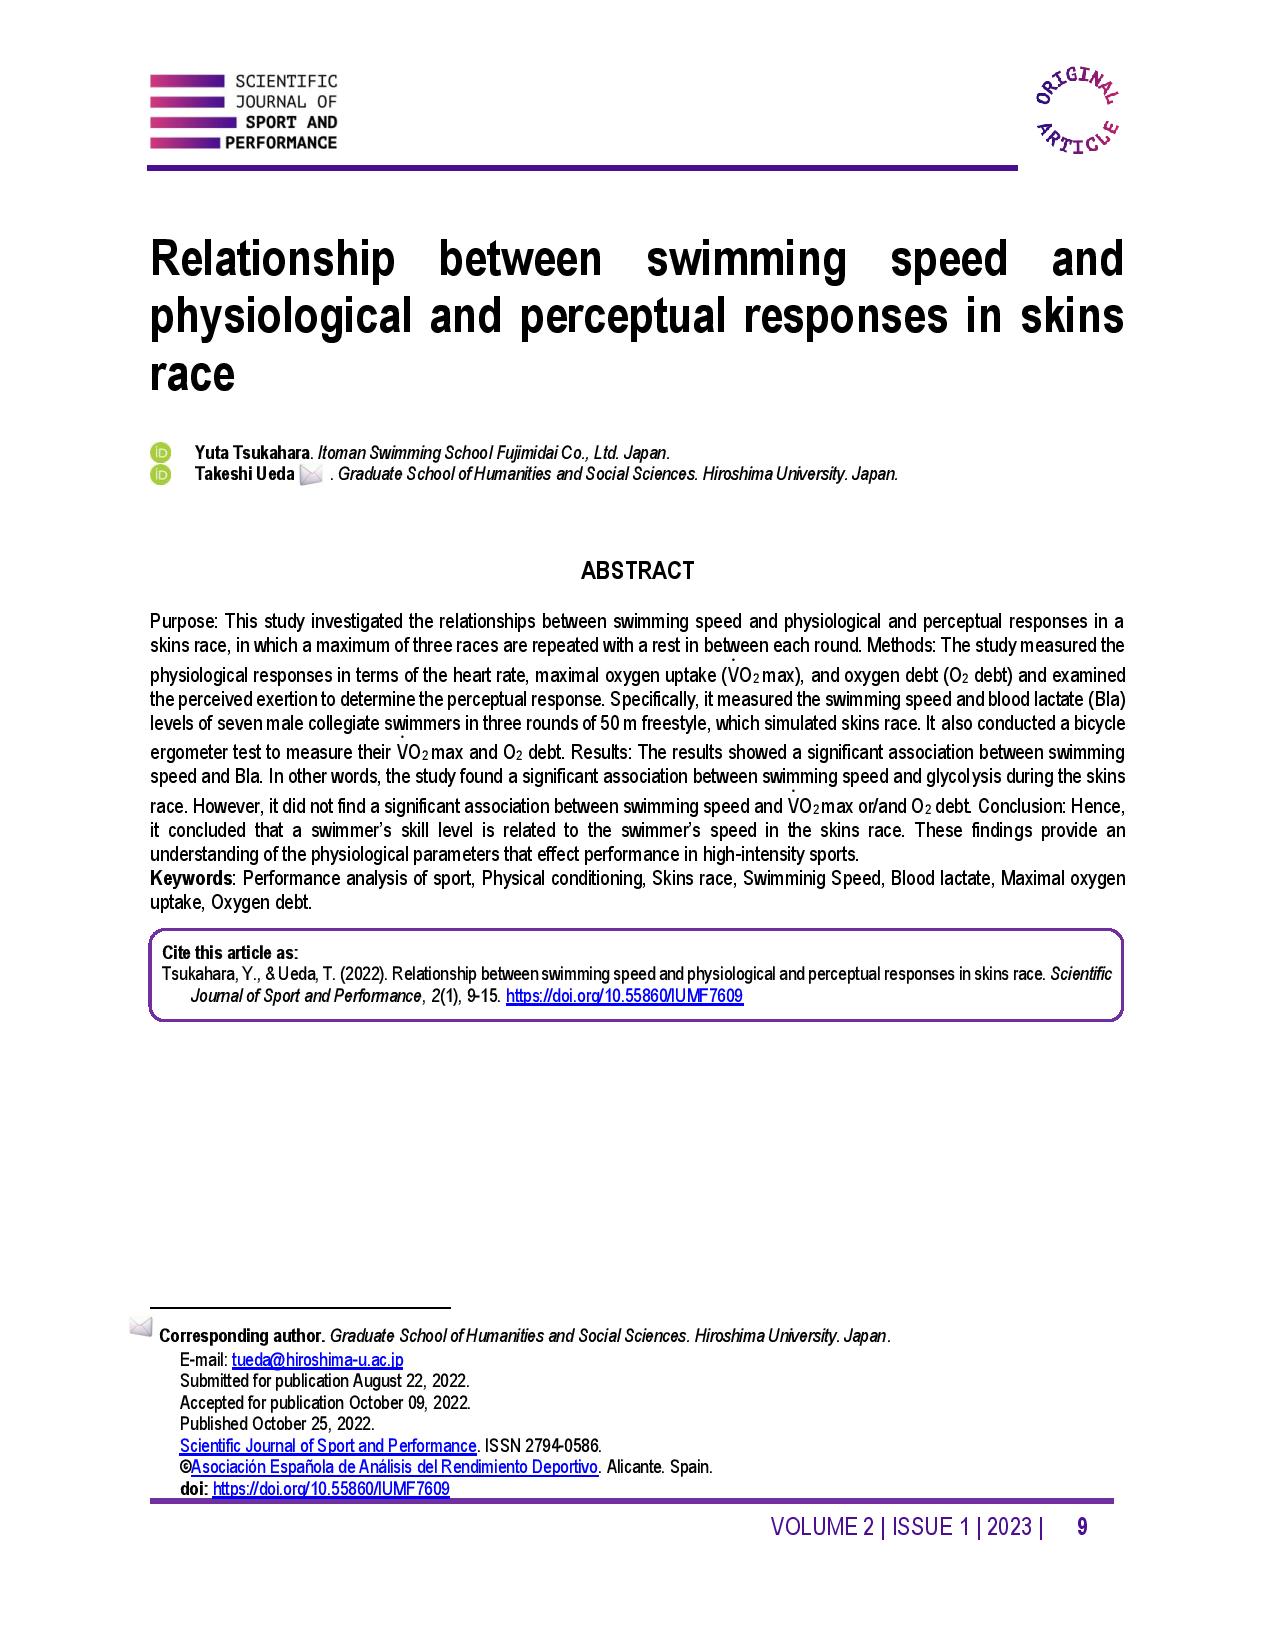 Relationship between swimming speed and physiological and perceptual responses in skins race